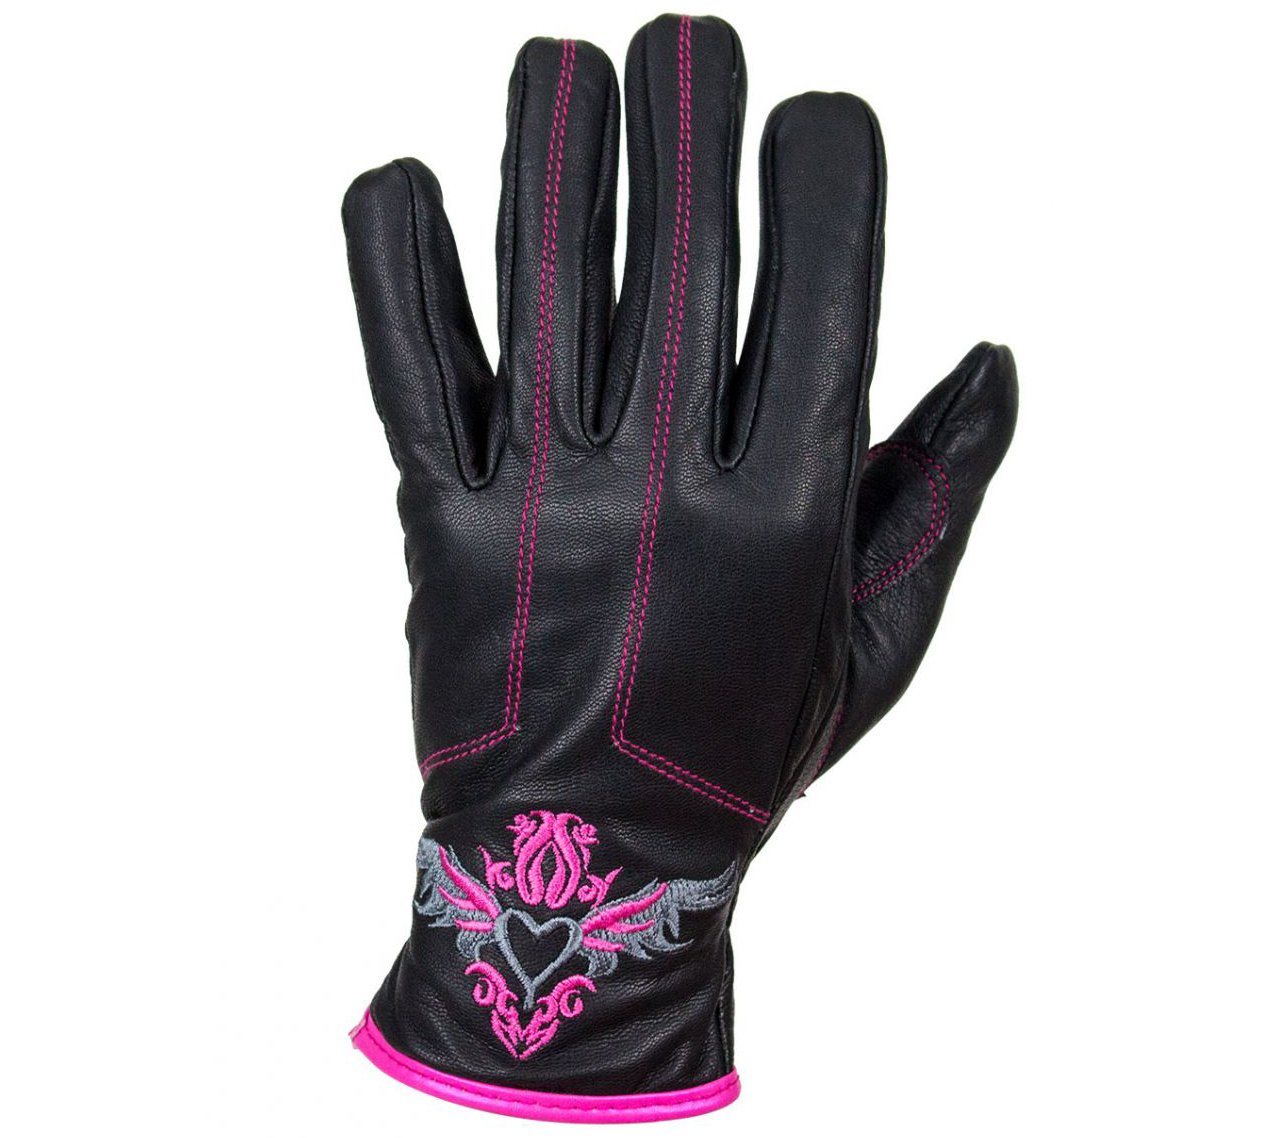 Leather Riding Gloves - Women's - Pink Embroidery - Full Finger - Motorcycle - GLZ106-EBL1-PINK-DL